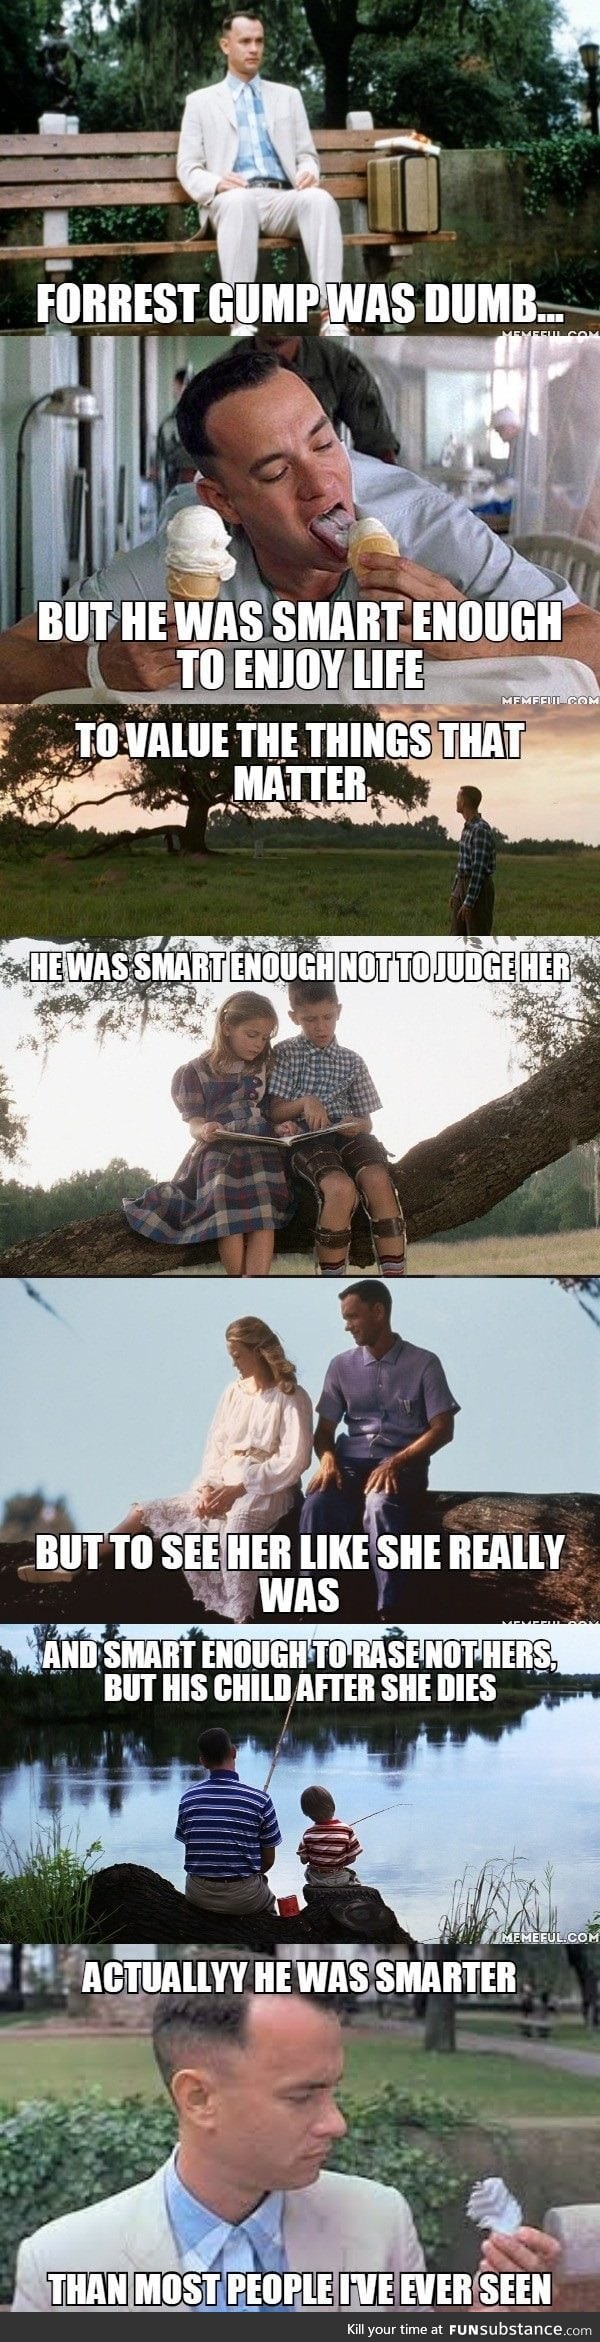 Forrest Gump wasn't just the story of a stupid guy